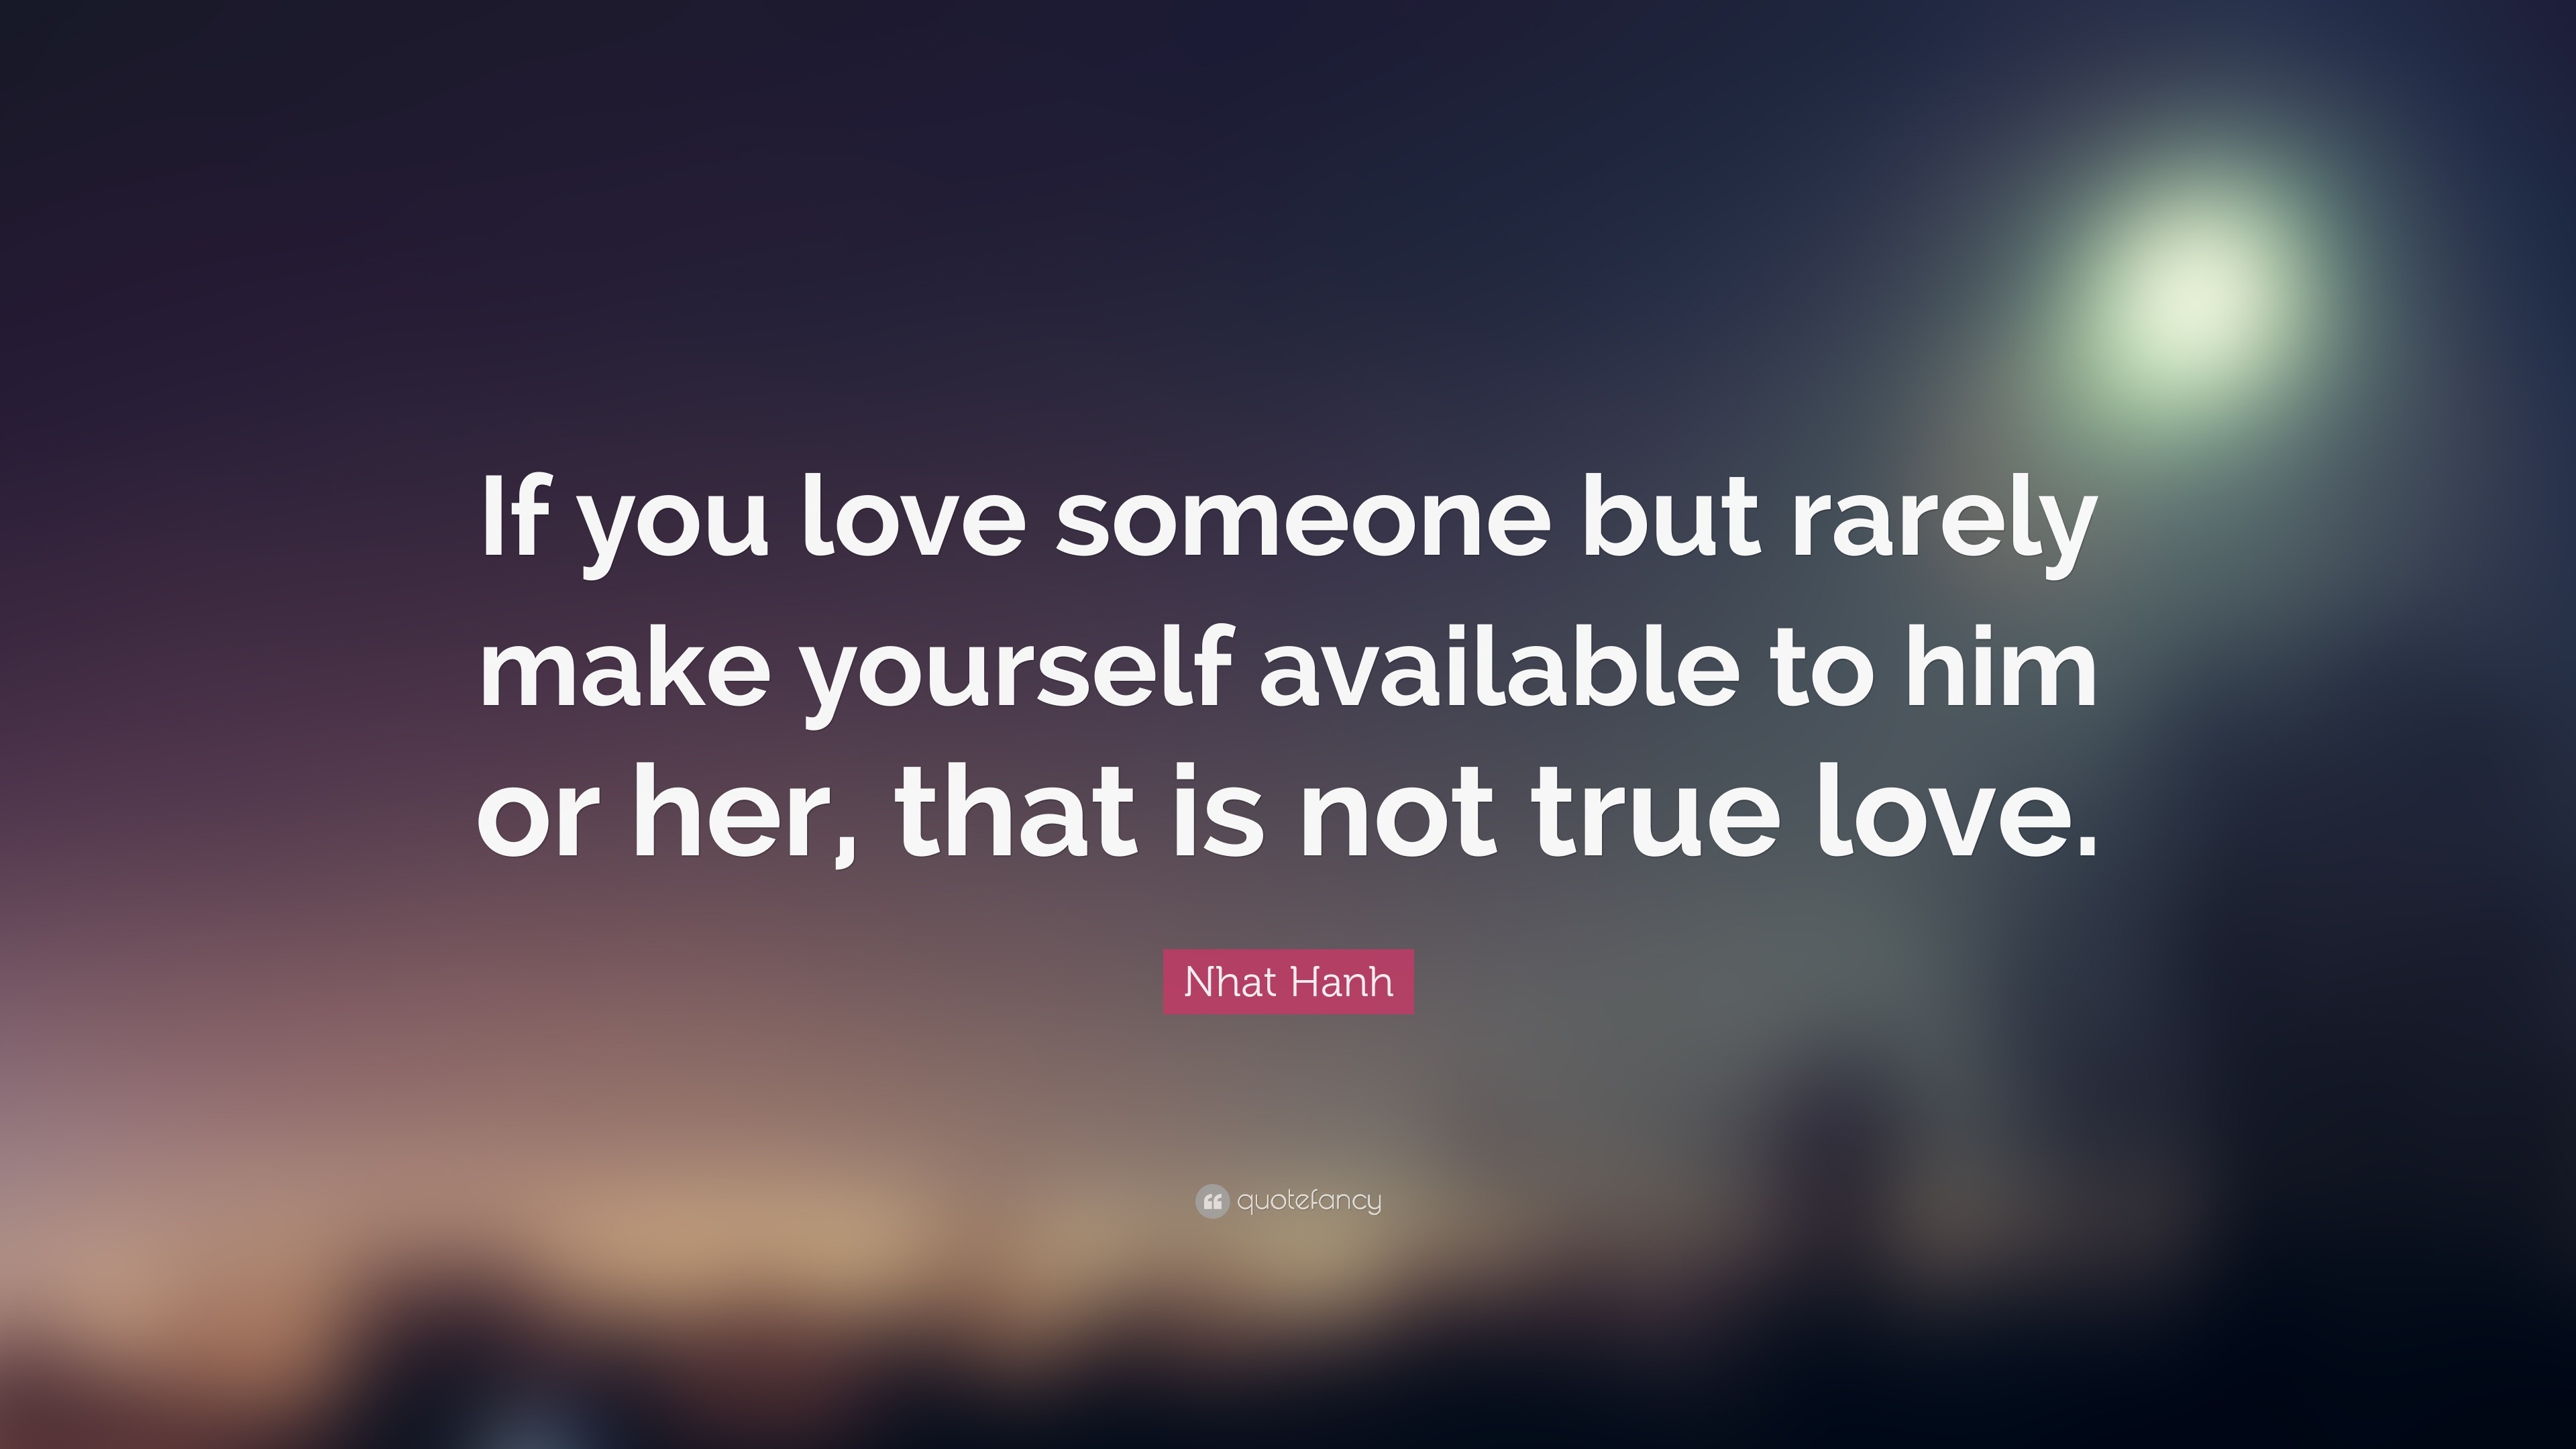 Nhat Hanh Quote “If you love someone but rarely make yourself available to him